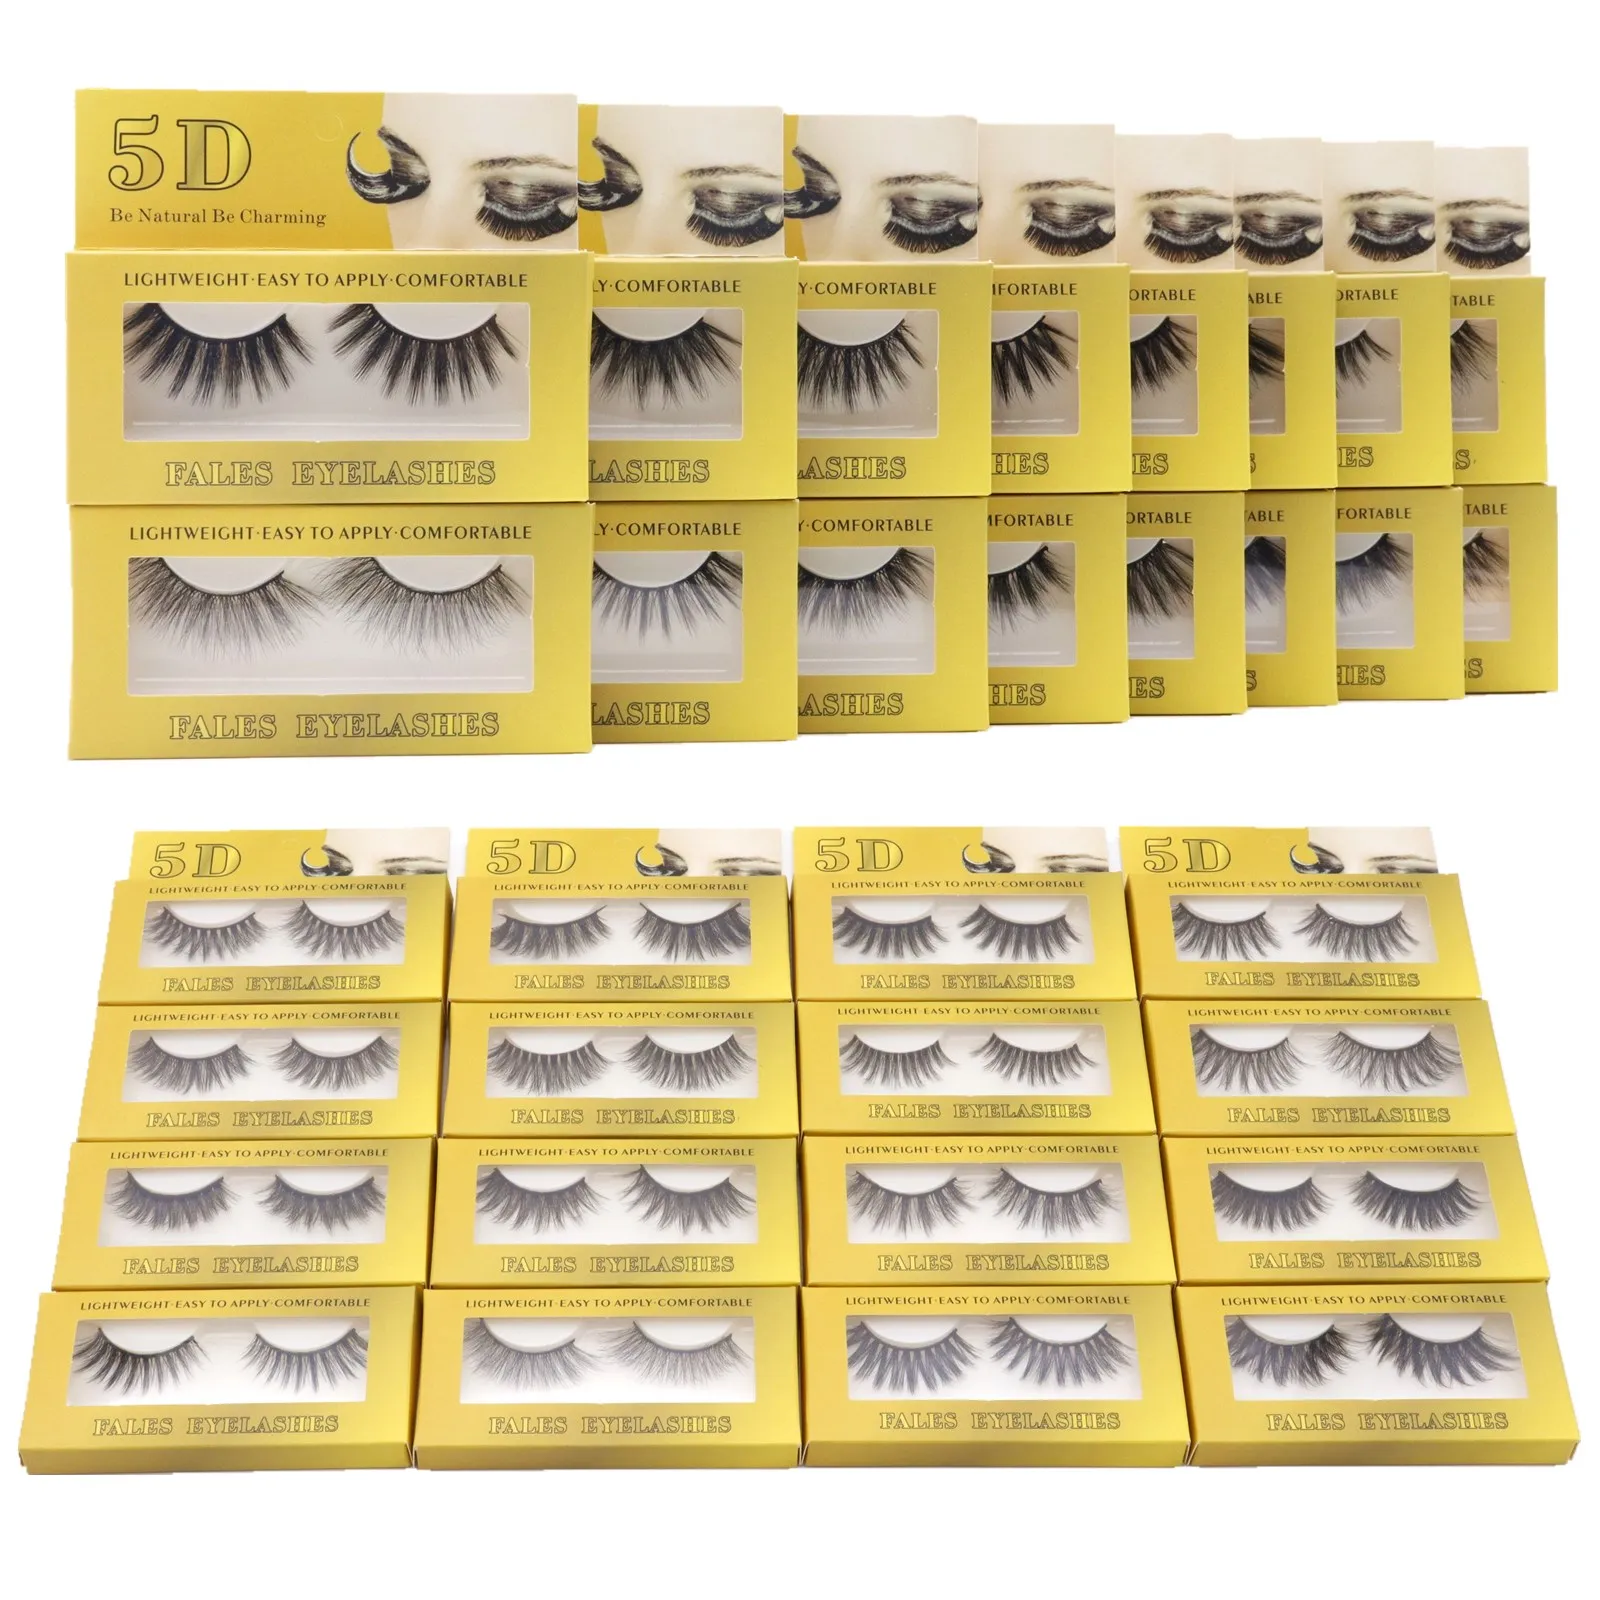 3D Mink Eyelashes 16 Styles Gros Cils Cruely Free Natural Long Faux Mink Lash Full Strip Ultra Wispies Fluffy False Eye Lashes Extension Maquillage holike